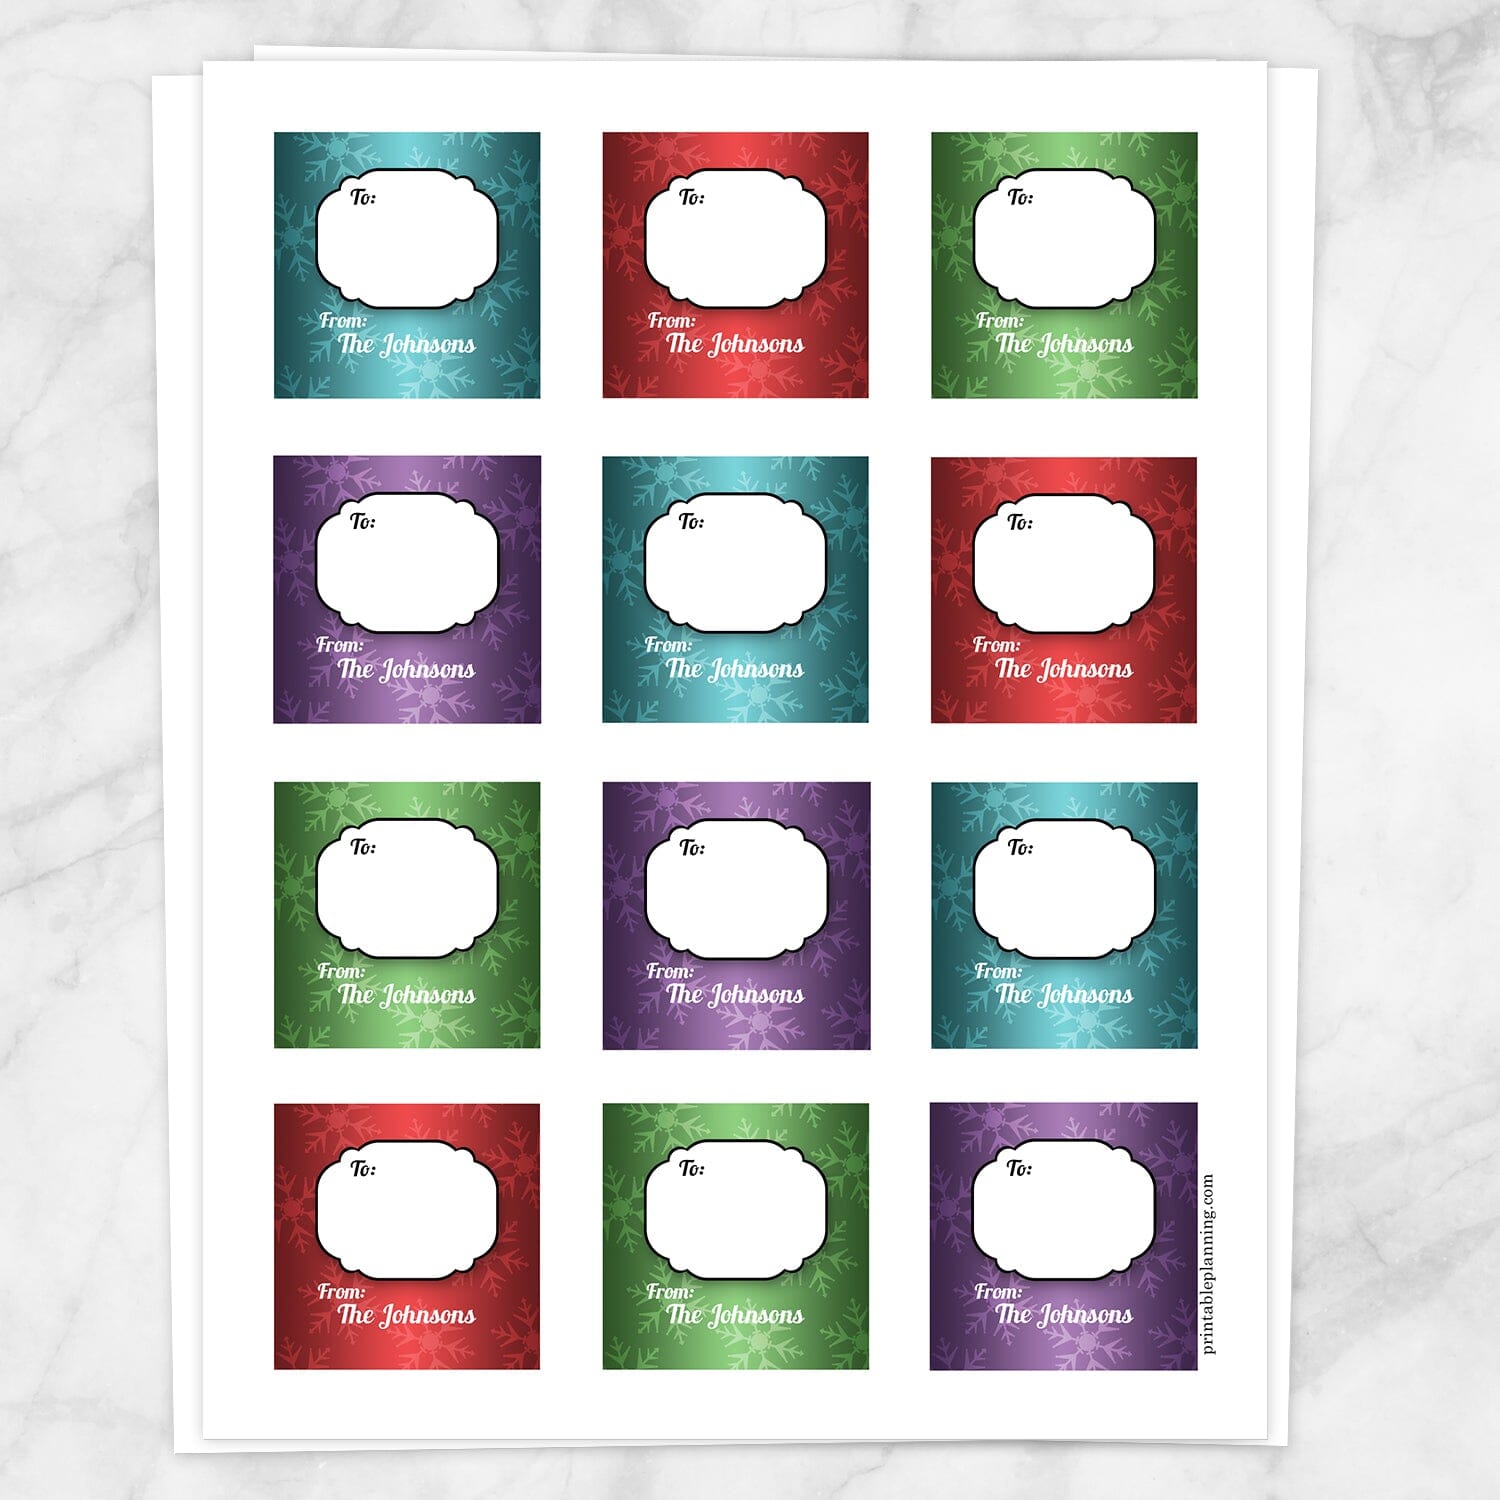 Printable Snowflake Rich Color Personalized Gift Tag Stickers at Printable Planning. Sheet of 12 stickers.